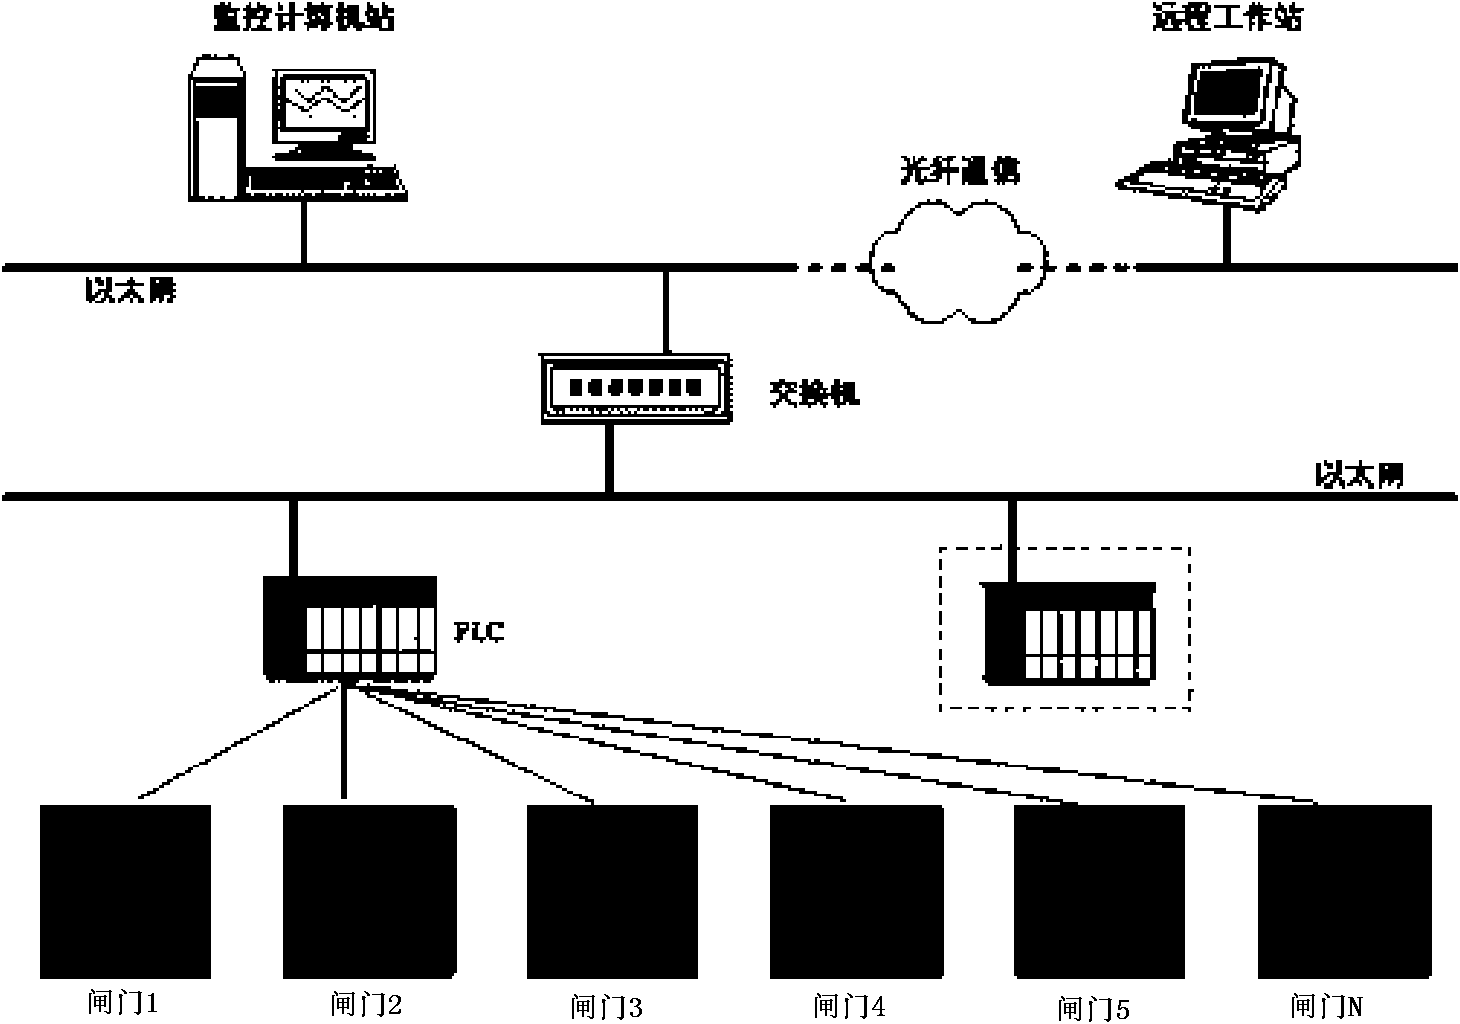 Water level automatic control method